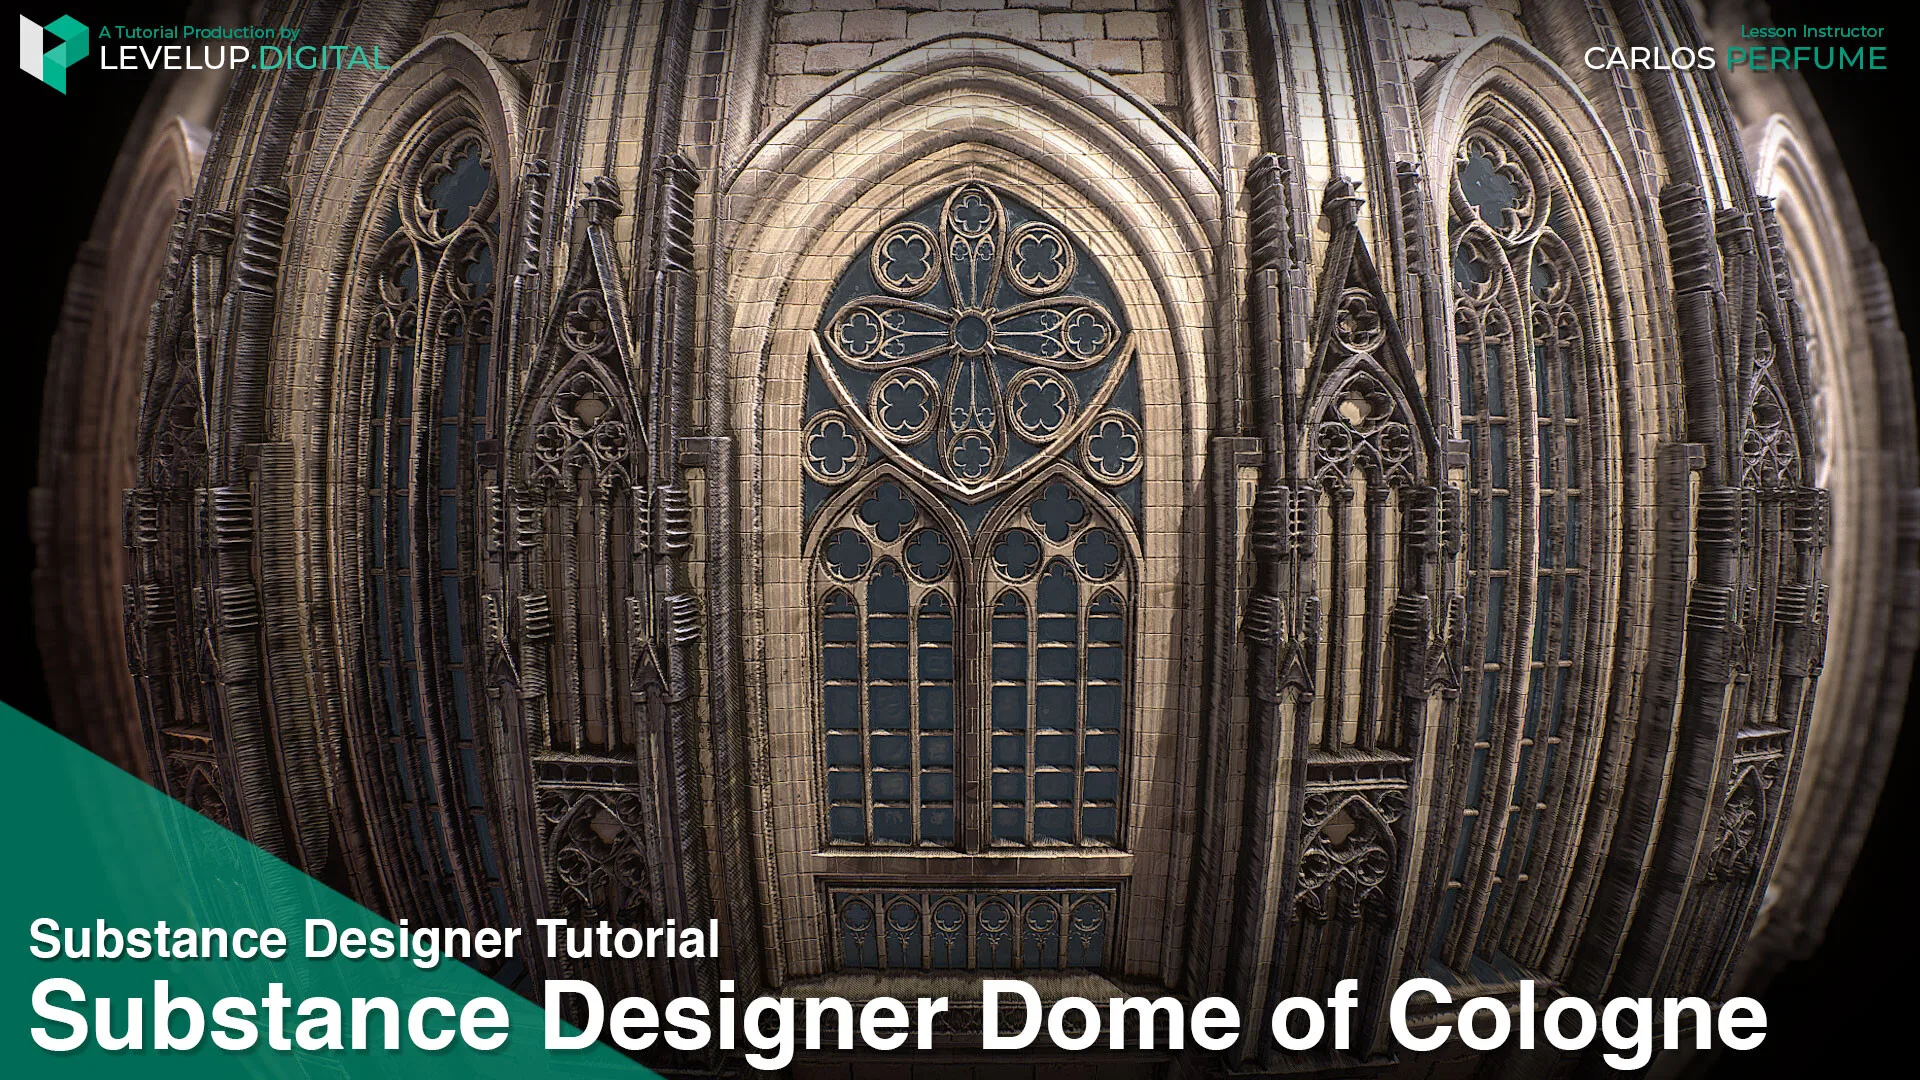 Substance Designer Dome of Cologne | Carlos Perfume